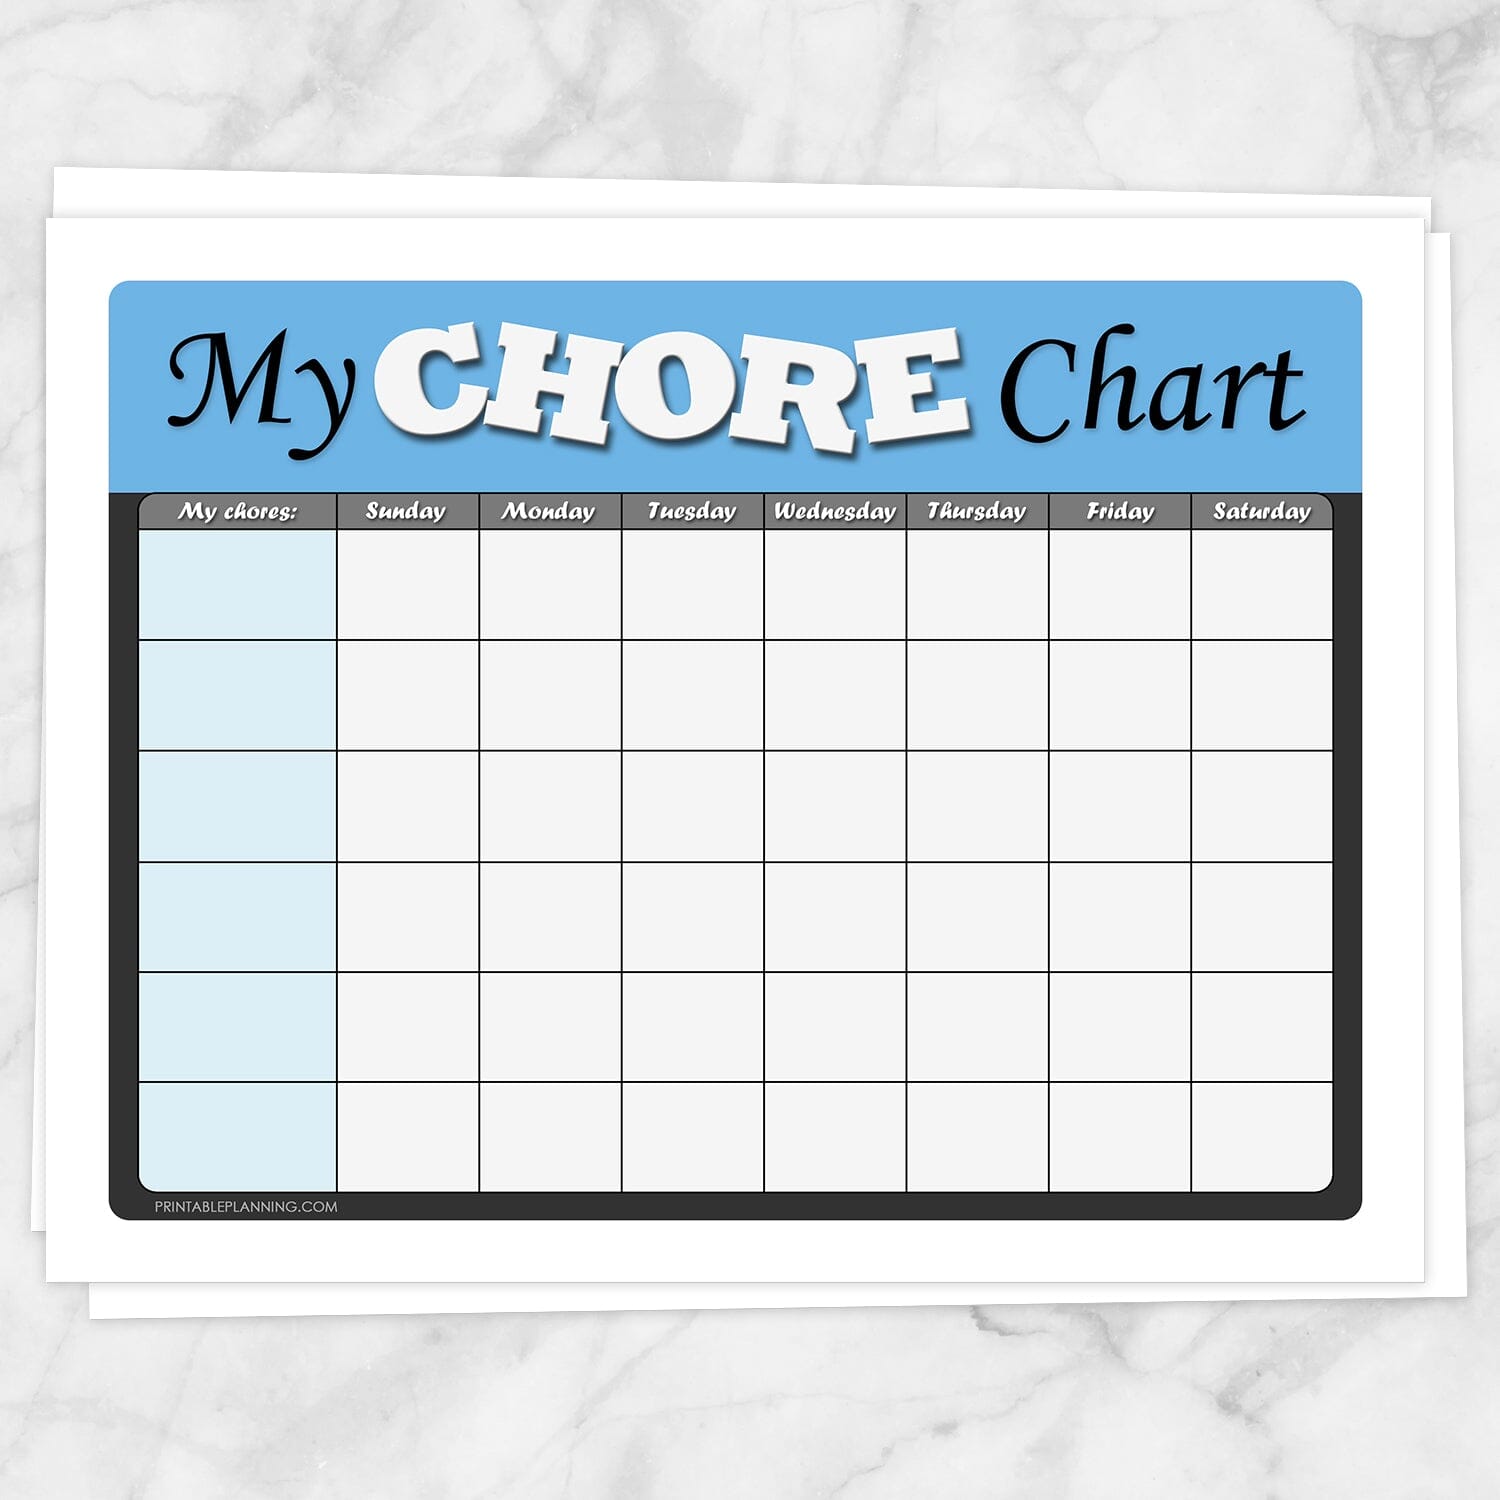 Printable Kids Chore Chart - 'My Chore Chart' Weekly Page in blue at Printable Planning.